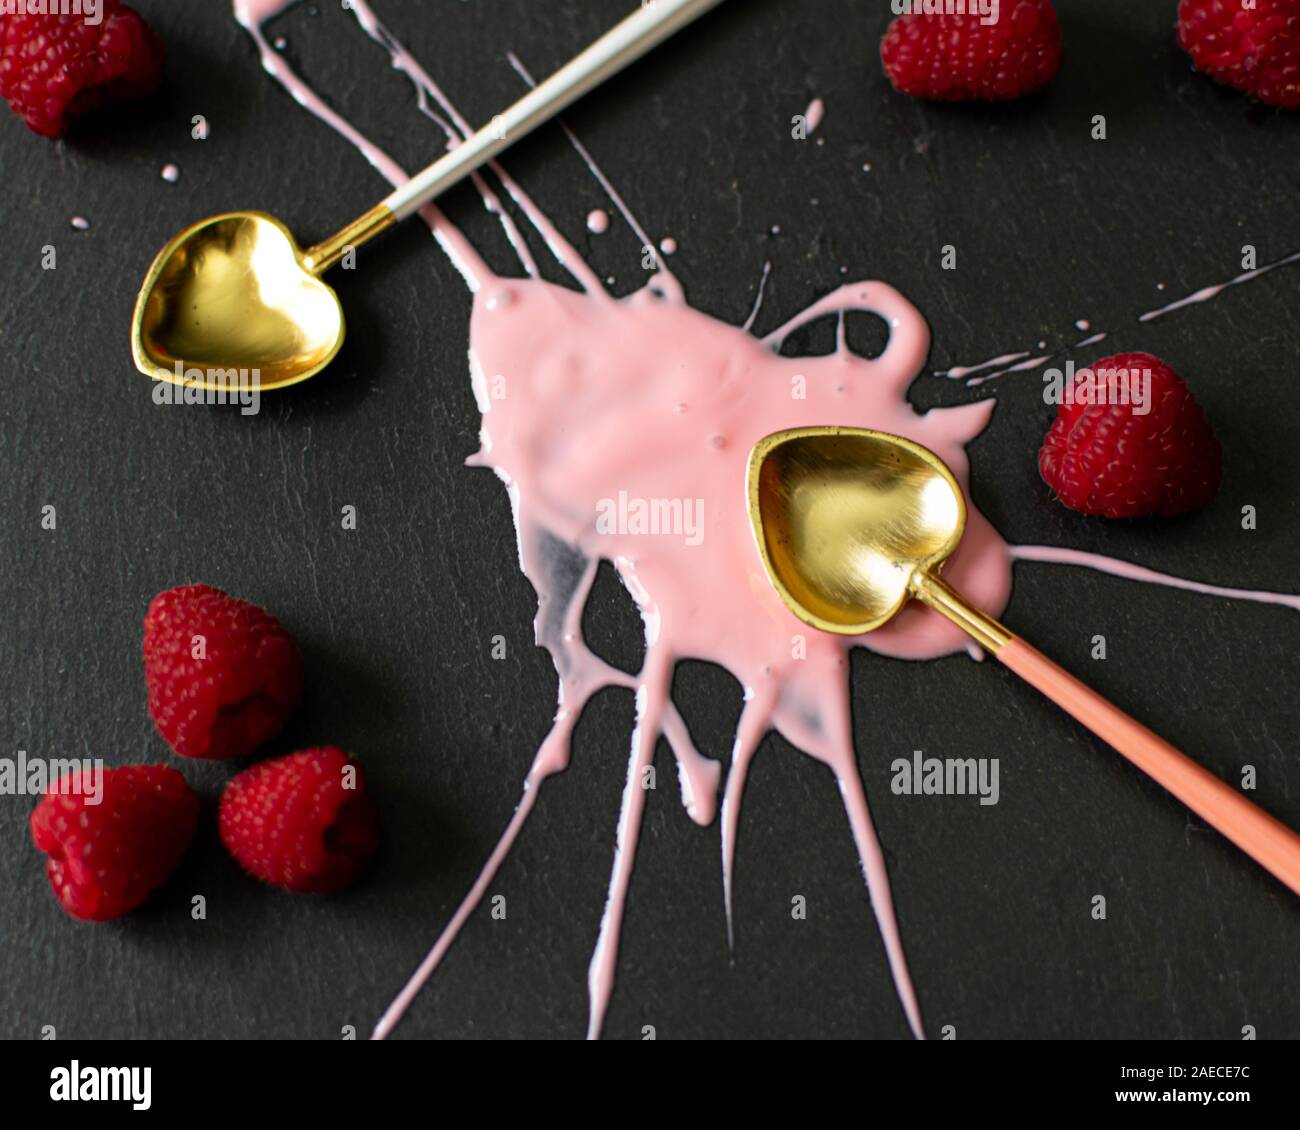 Yogurt splashed over a dark grey black background with bright pink and red raspberries and gold spoons Stock Photo